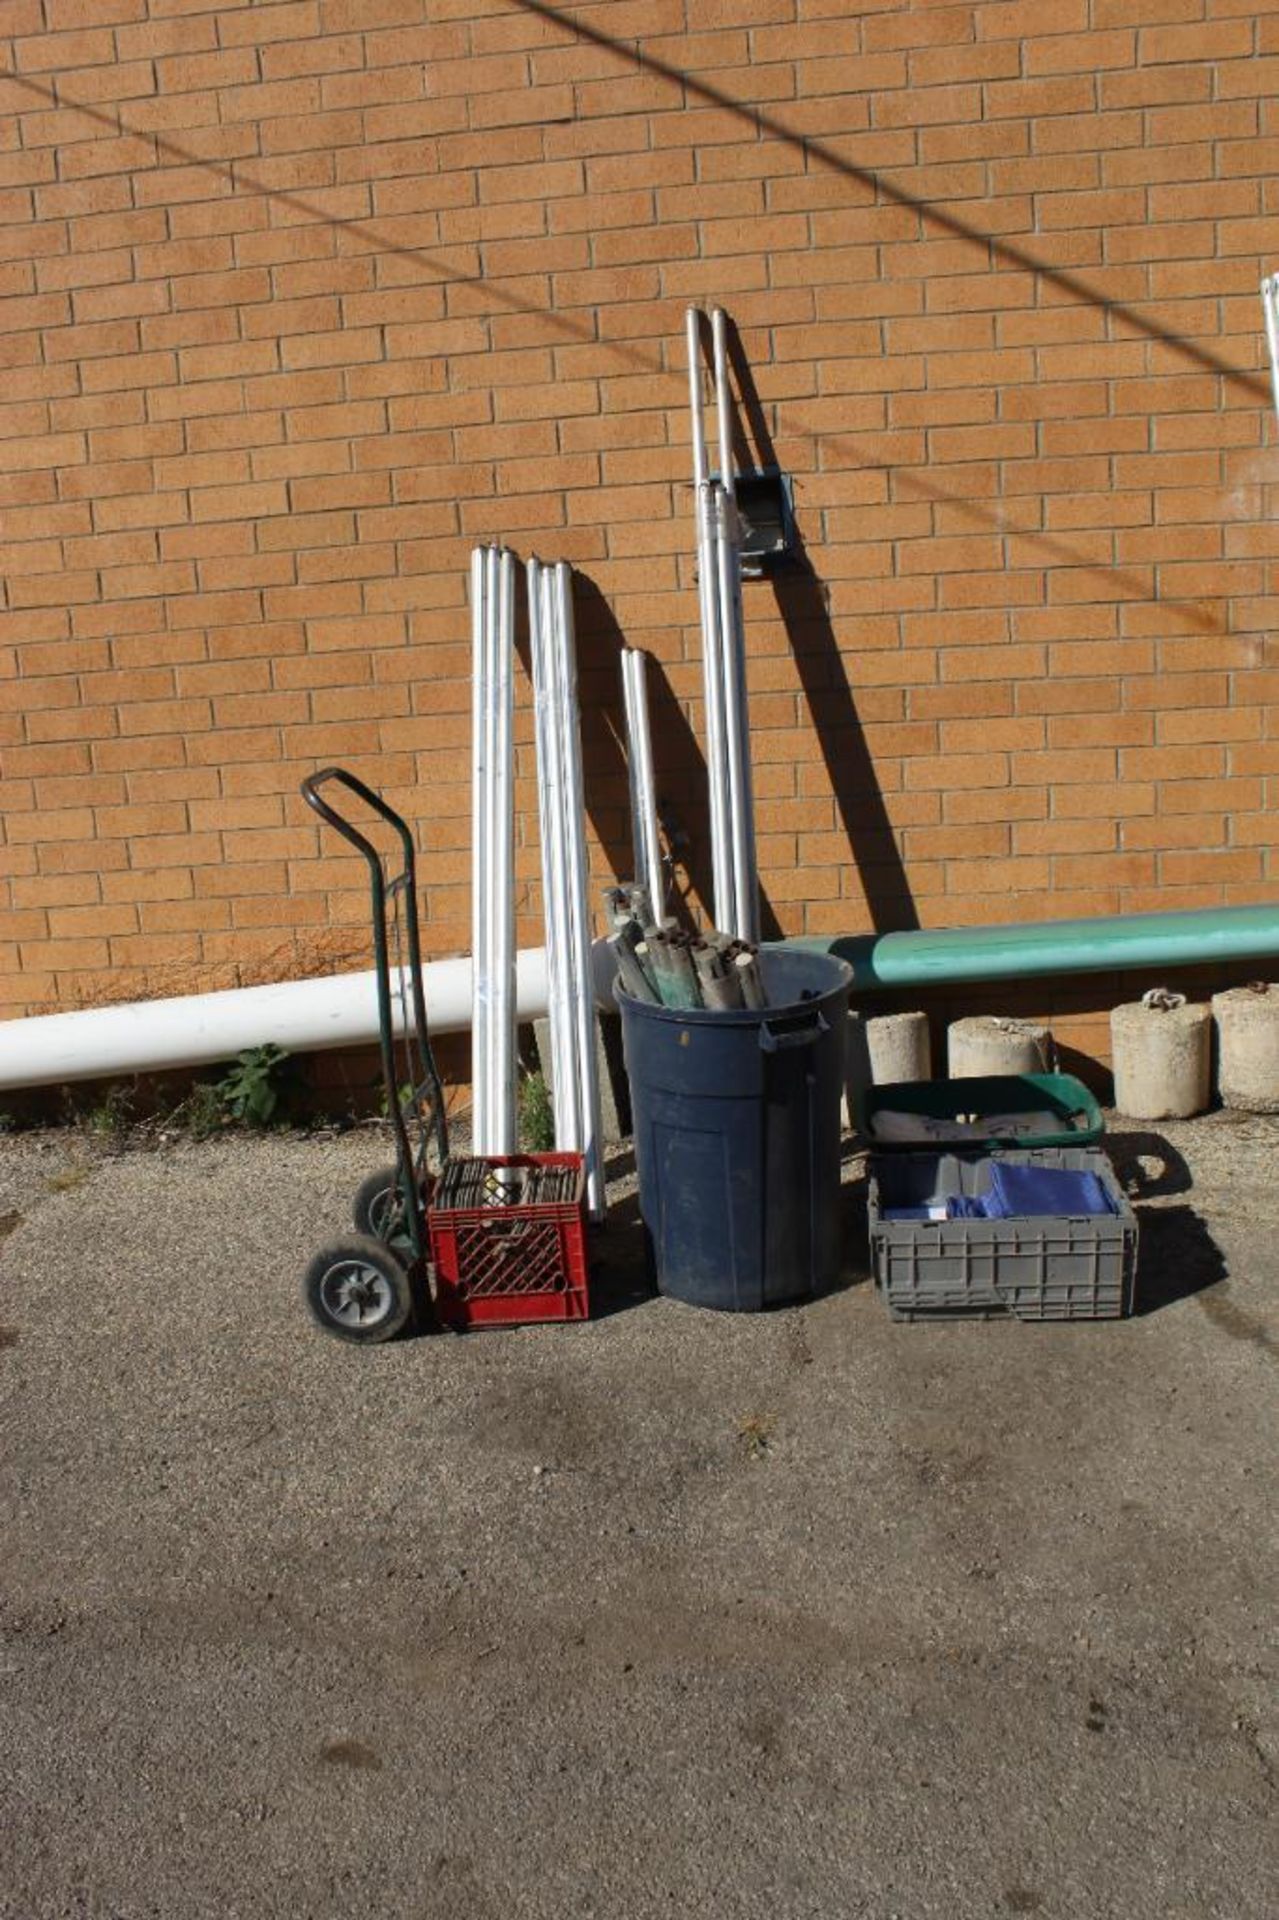 LOT: Pipe and Drape Pipes (23) 3 ft. Uprights, (19) Baseplates, (17) 6-10 ft. Cross Bars, (2) 3-6 Ft